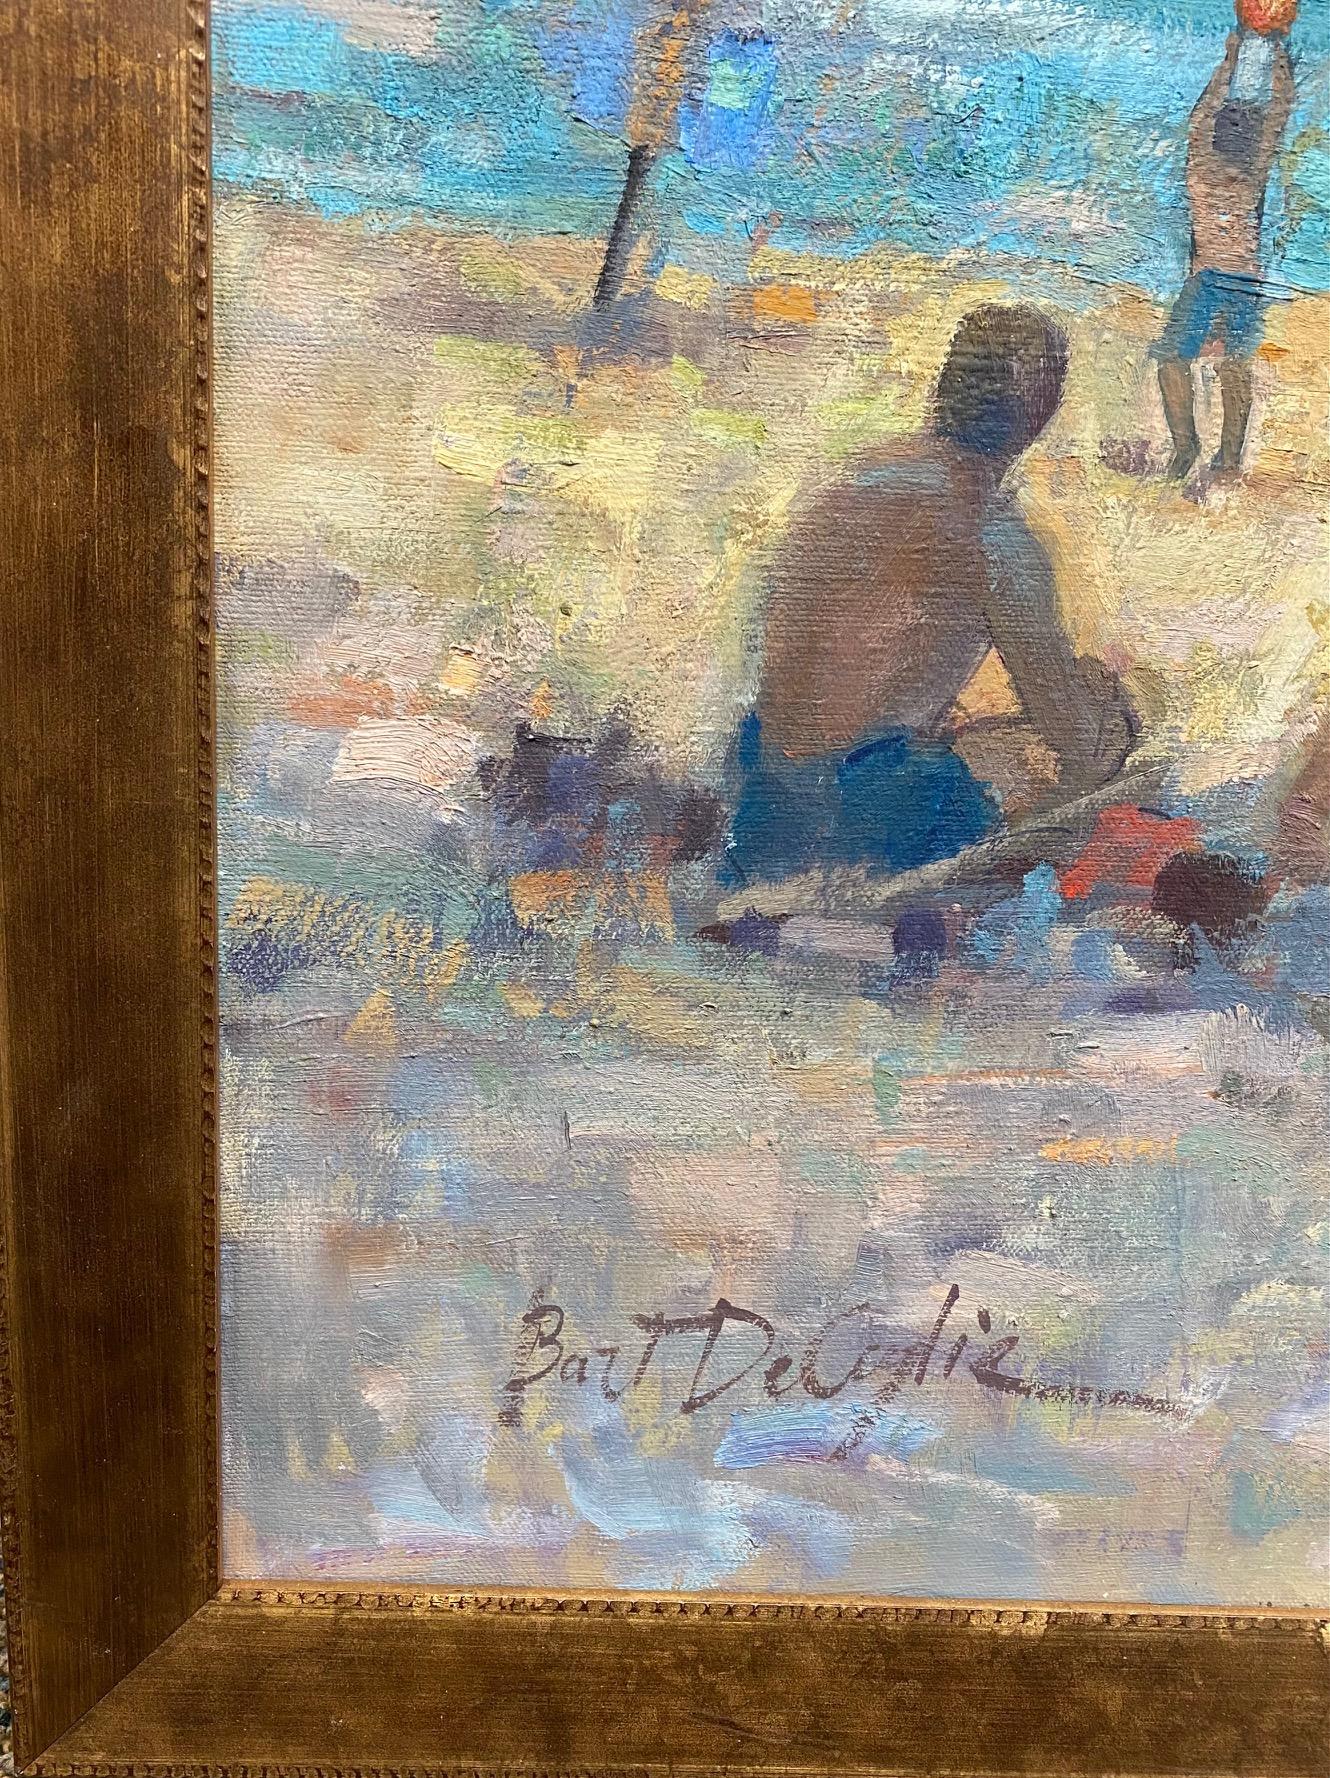 Another Day at the Beach, paysage marin figuratif original 20x30 en vente 4